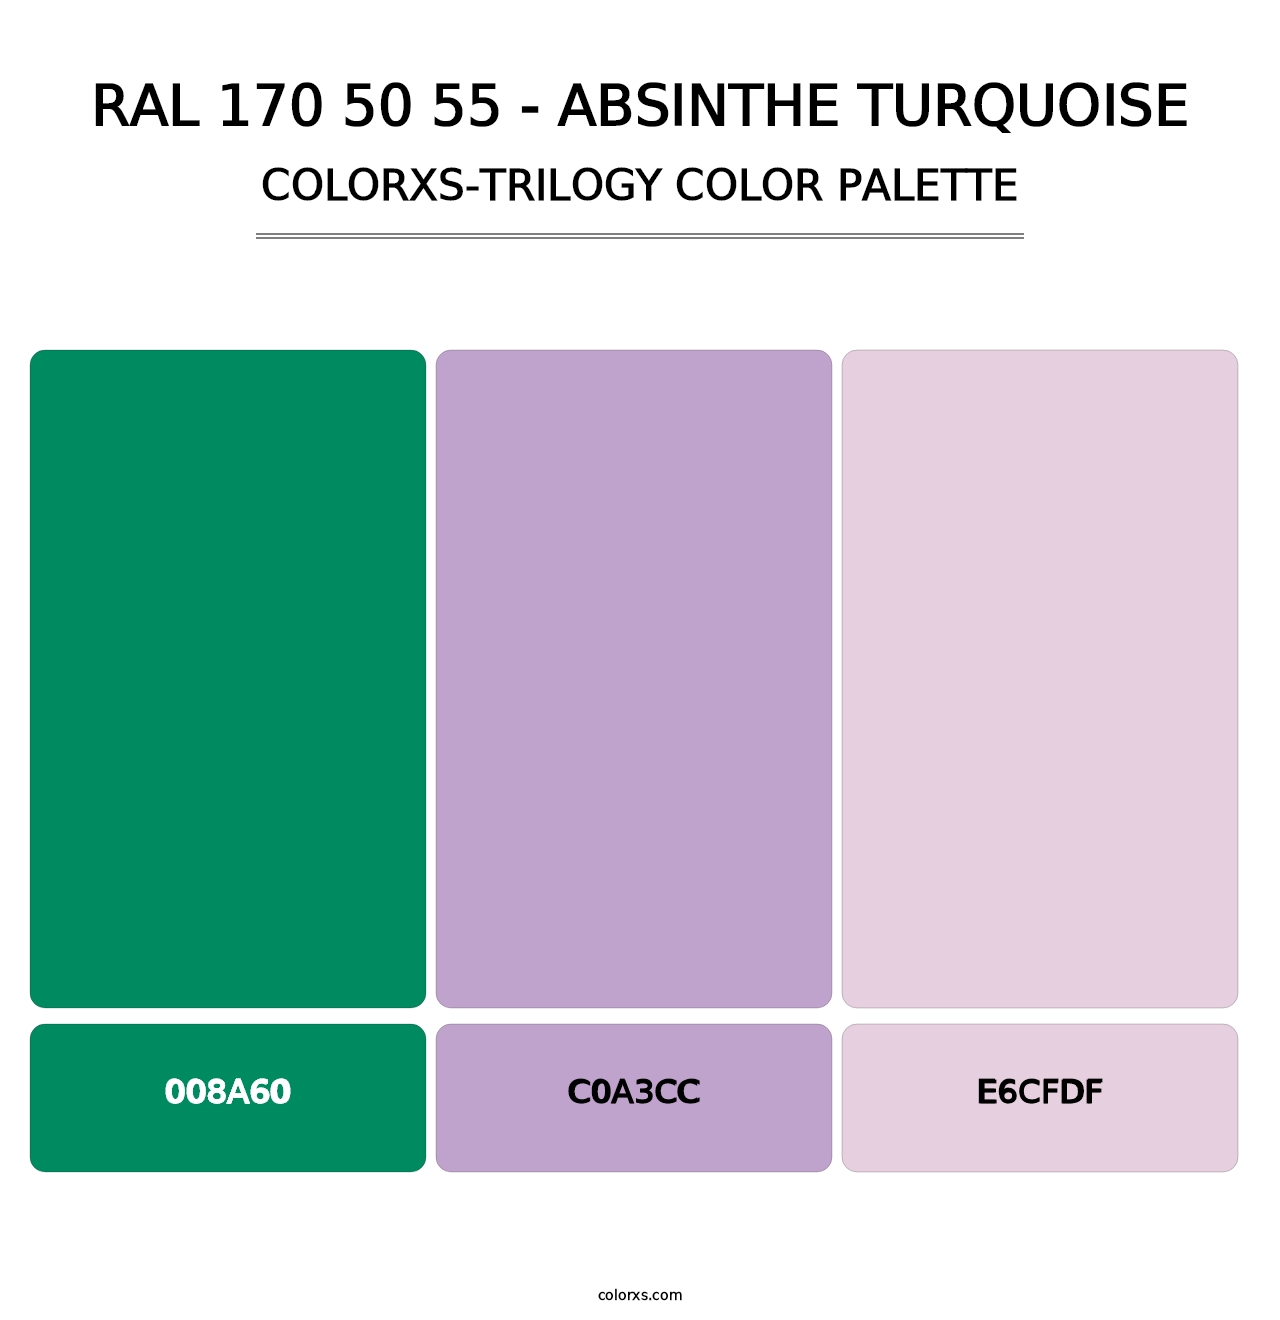 RAL 170 50 55 - Absinthe Turquoise - Colorxs Trilogy Palette